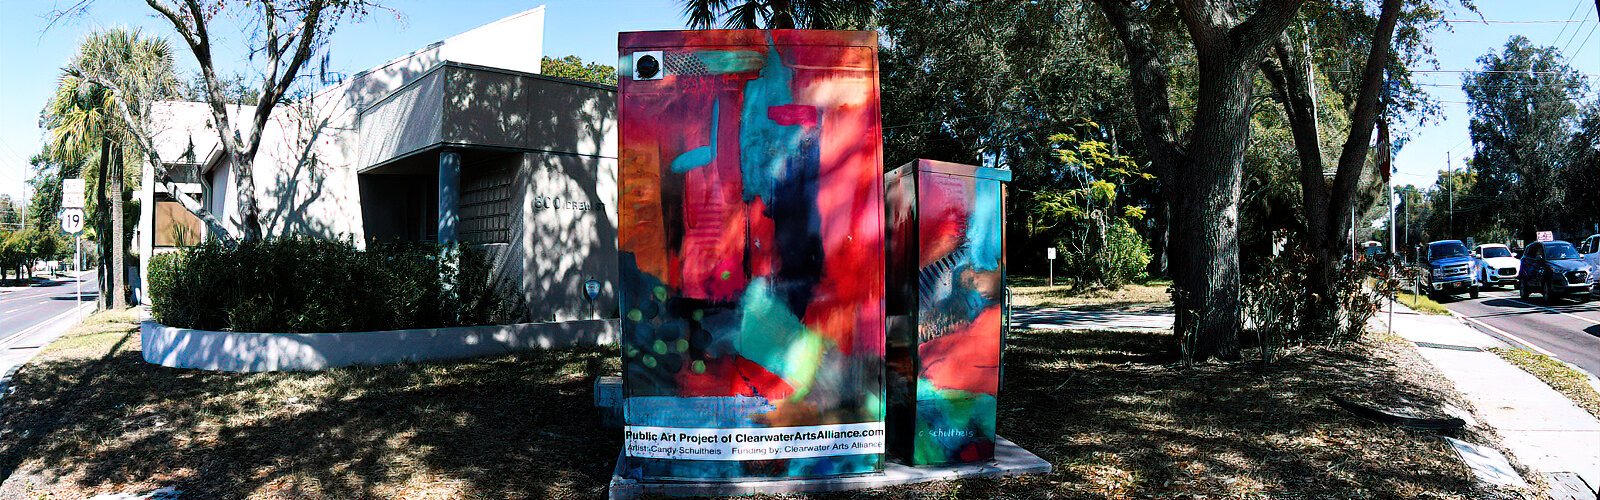 Dunedin artist Candy Schultheis created her artwork “You Can’t Get There From Here” for the art-wrapped signal boxes Public Art Project of Clearwater Arts Alliance.